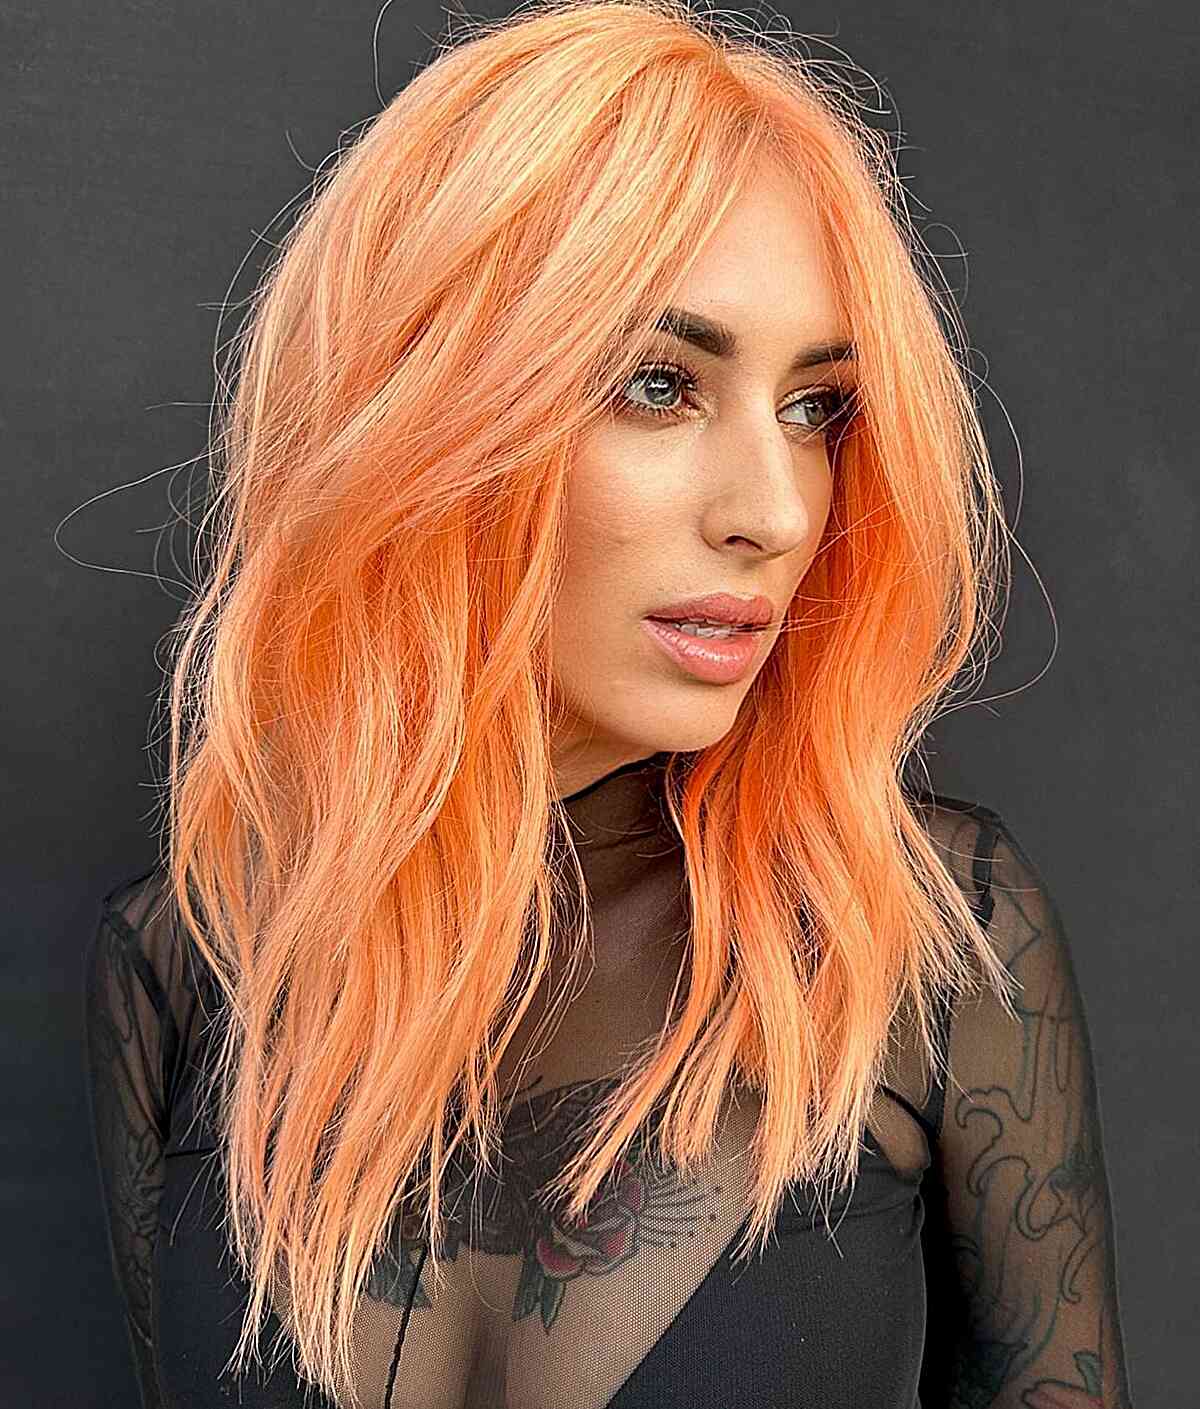 Copper Peach Color Melt Is Instagram's Latest Take on Peach Hair | Allure